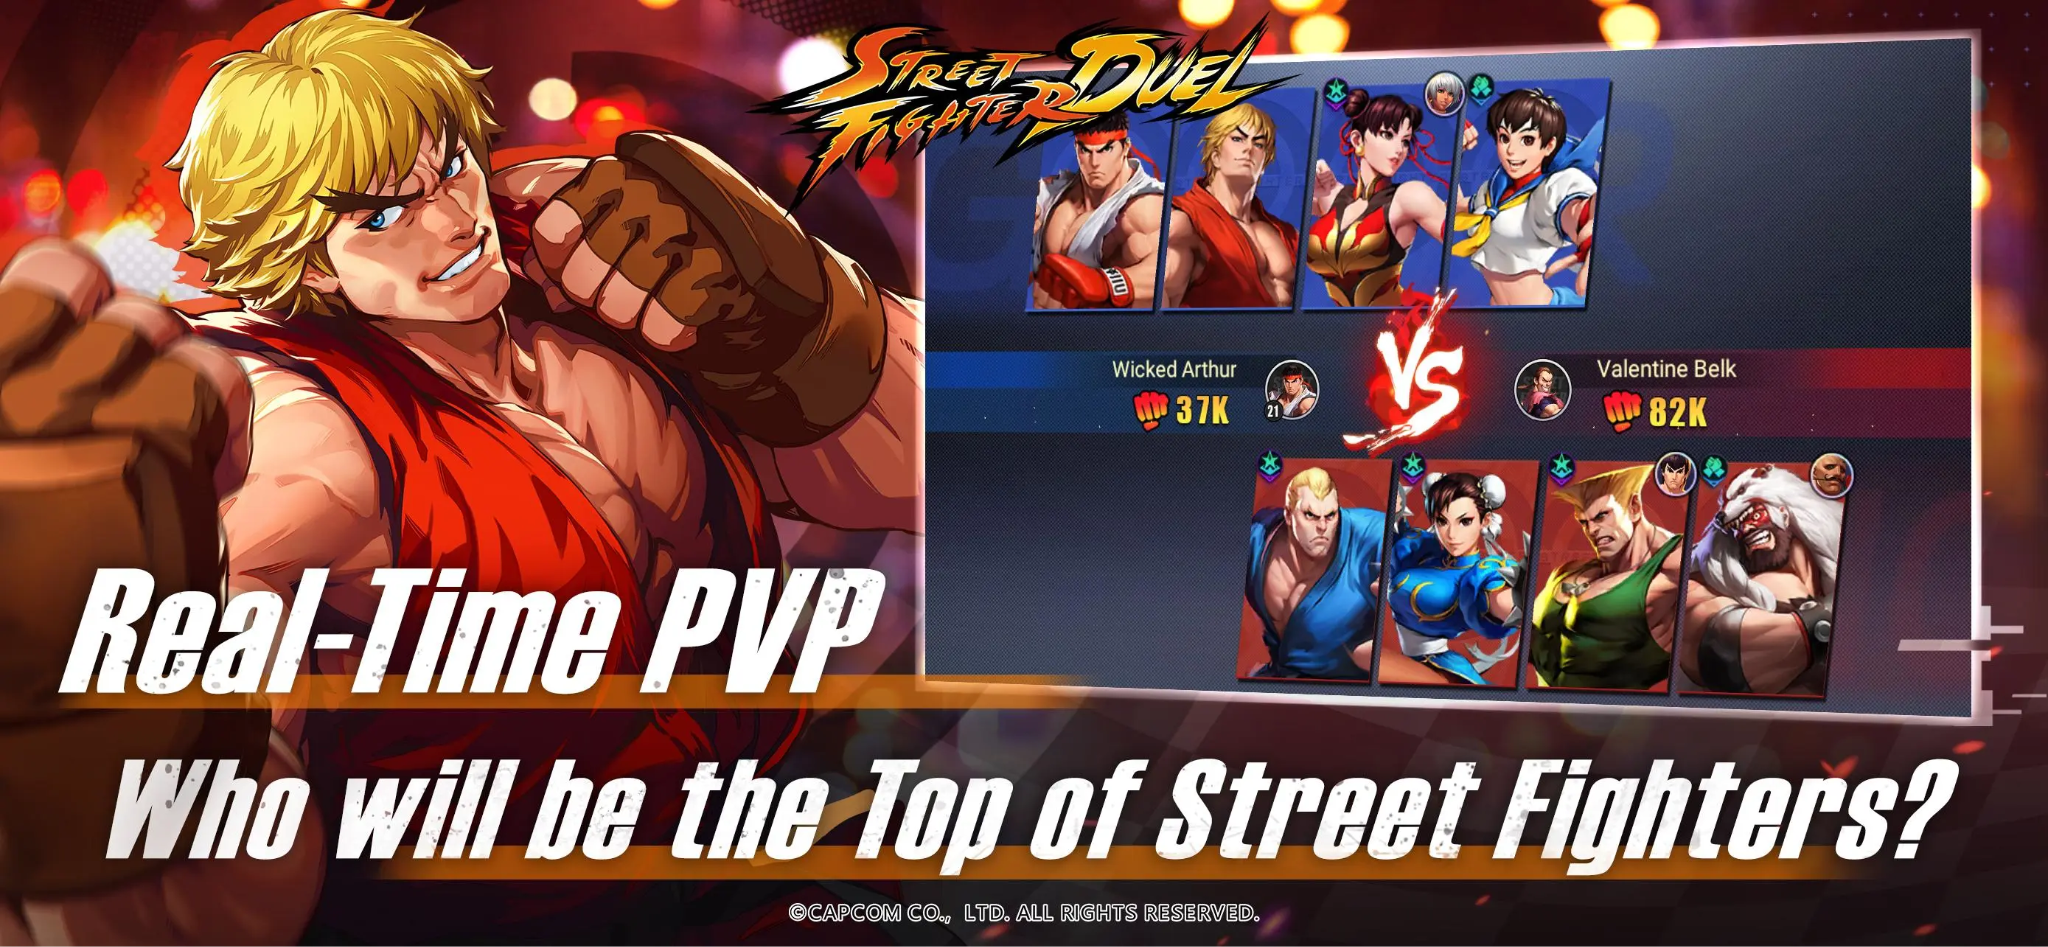 My five favorite Street Fighter characters of all time - Street